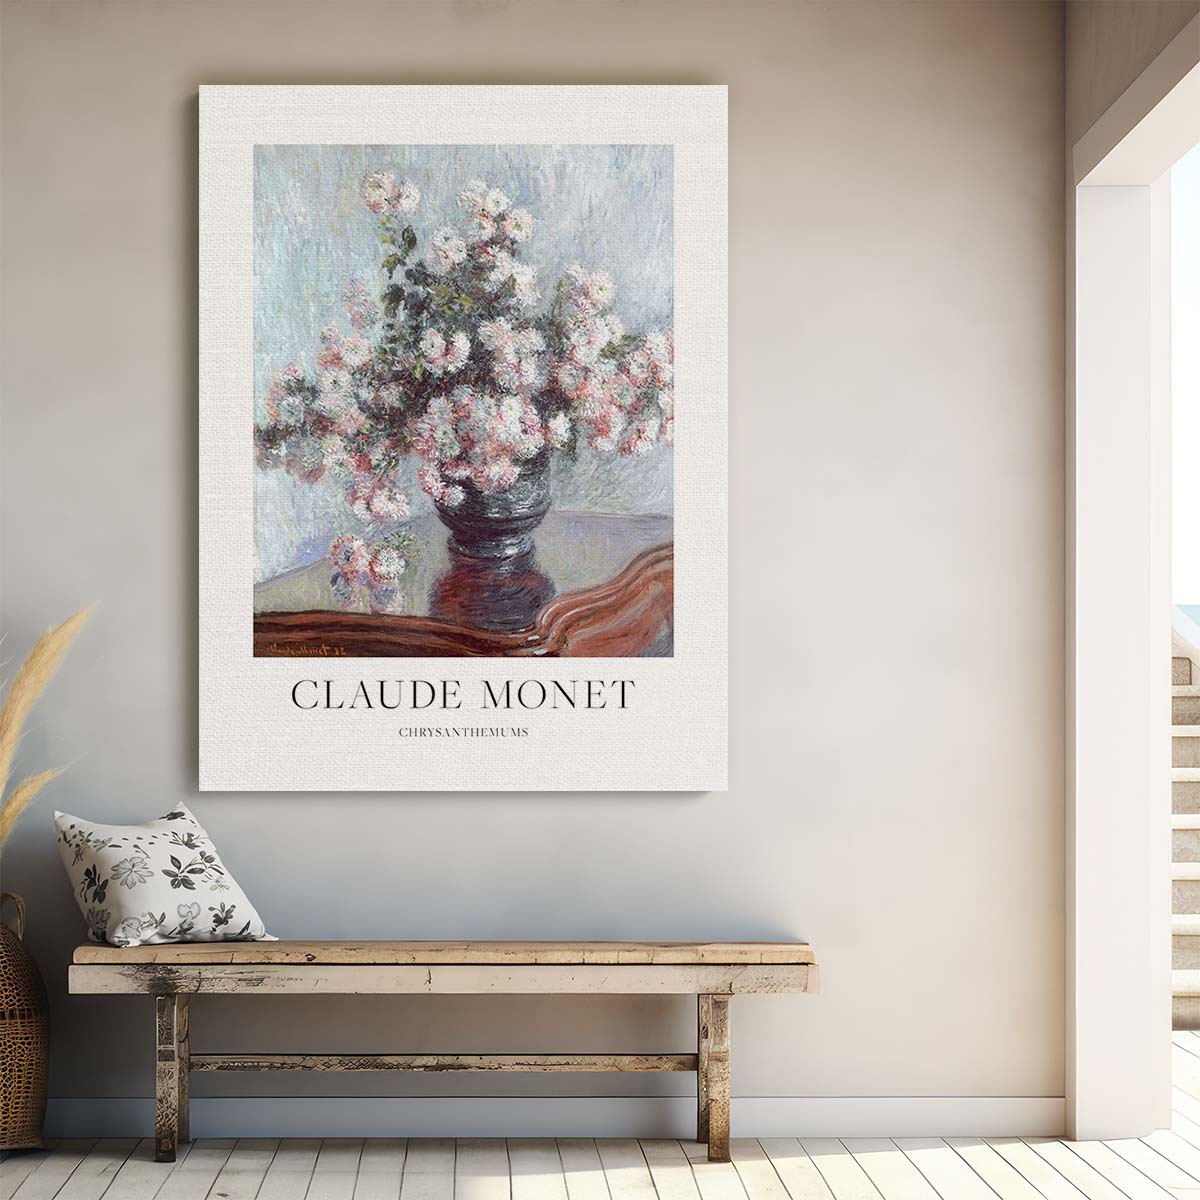 Claude Monet's Bright Chrysanthemums Oil Paint Illustration by Luxuriance Designs, made in USA